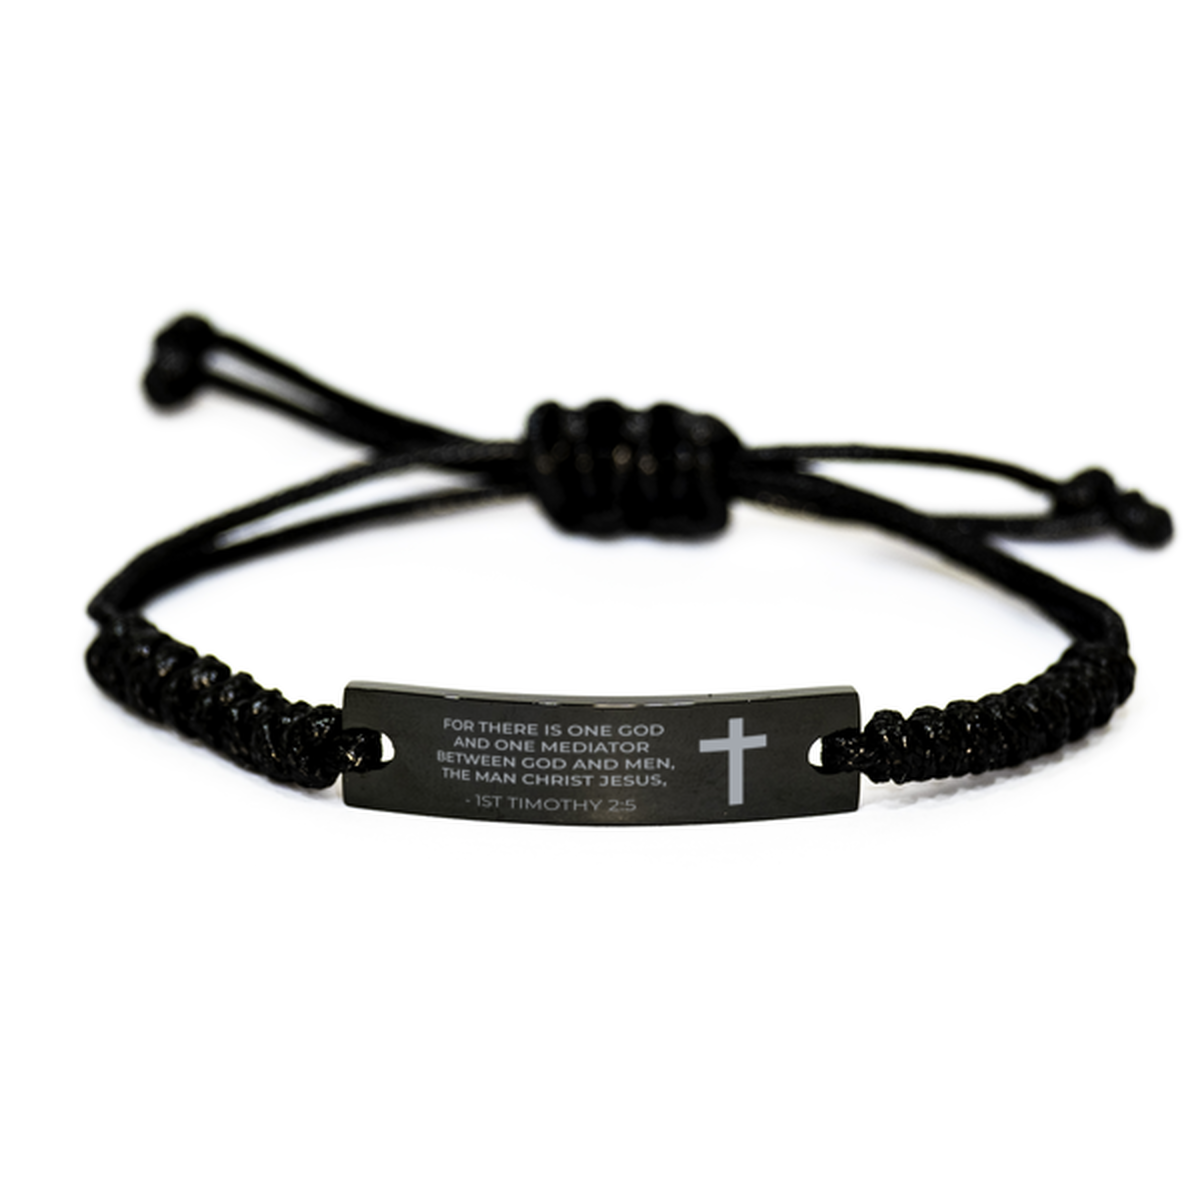 Bible Verse Rope Bracelet, 1St Timothy 2:5 For There Is One God And One Mediator, Christian Encouraging Gifts For Men Women Boys Girls